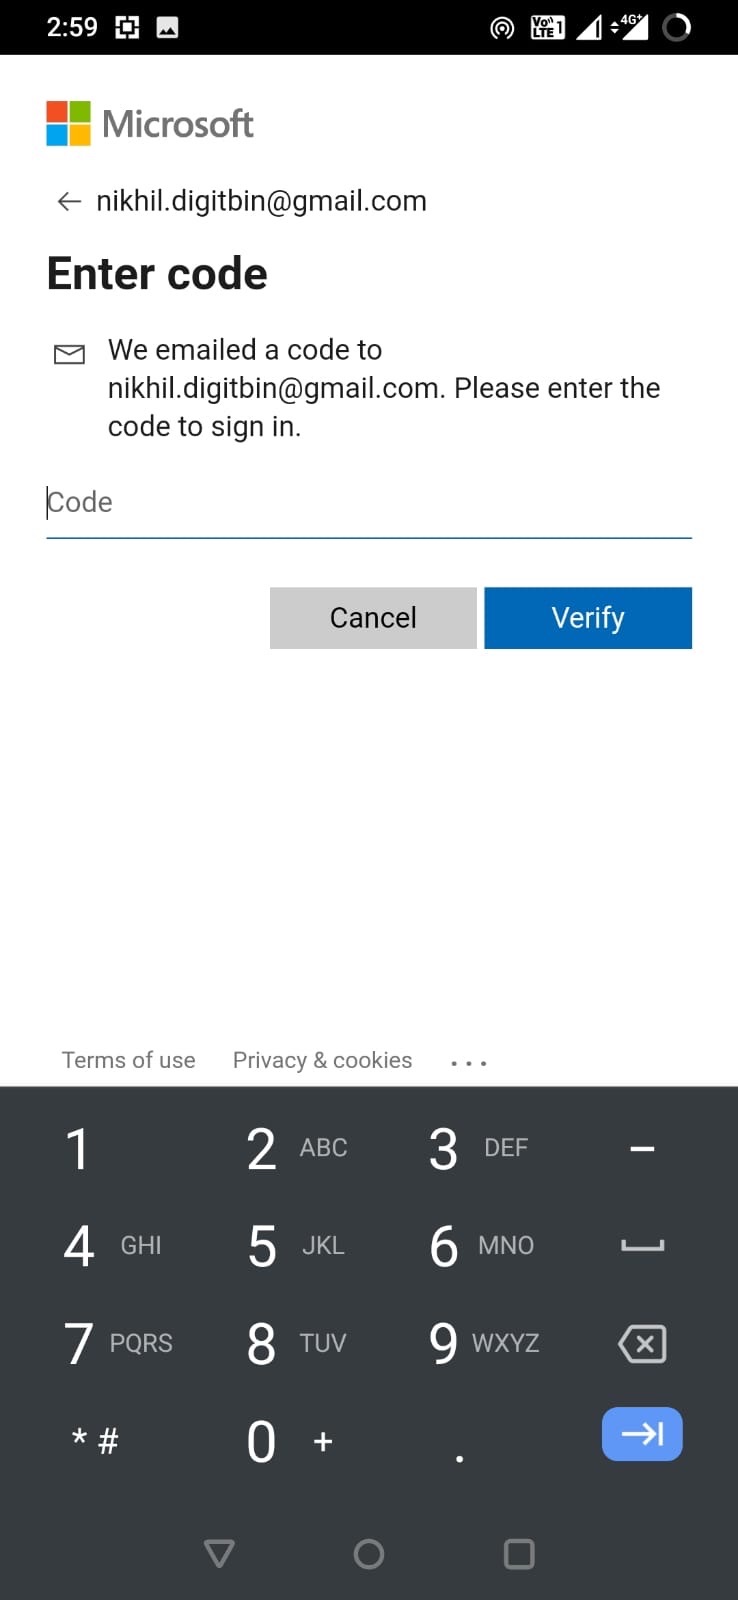 Enter_Code_to_Confirm_Identity